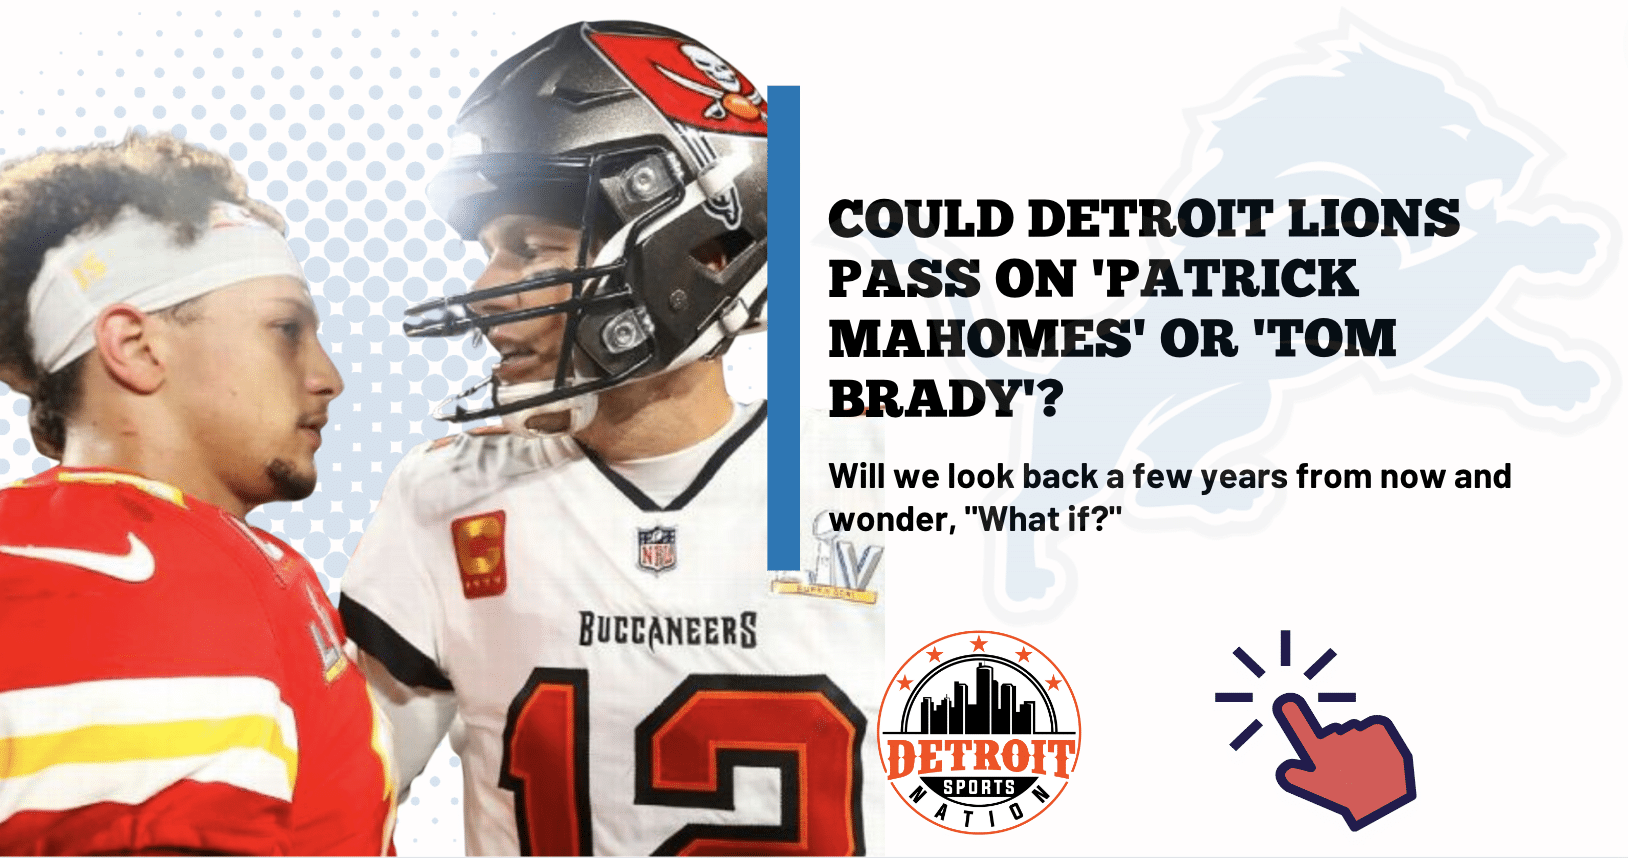 Could Detroit Lions pass on next ‘Patrick Mahomes’ or ‘Tom Brady’?